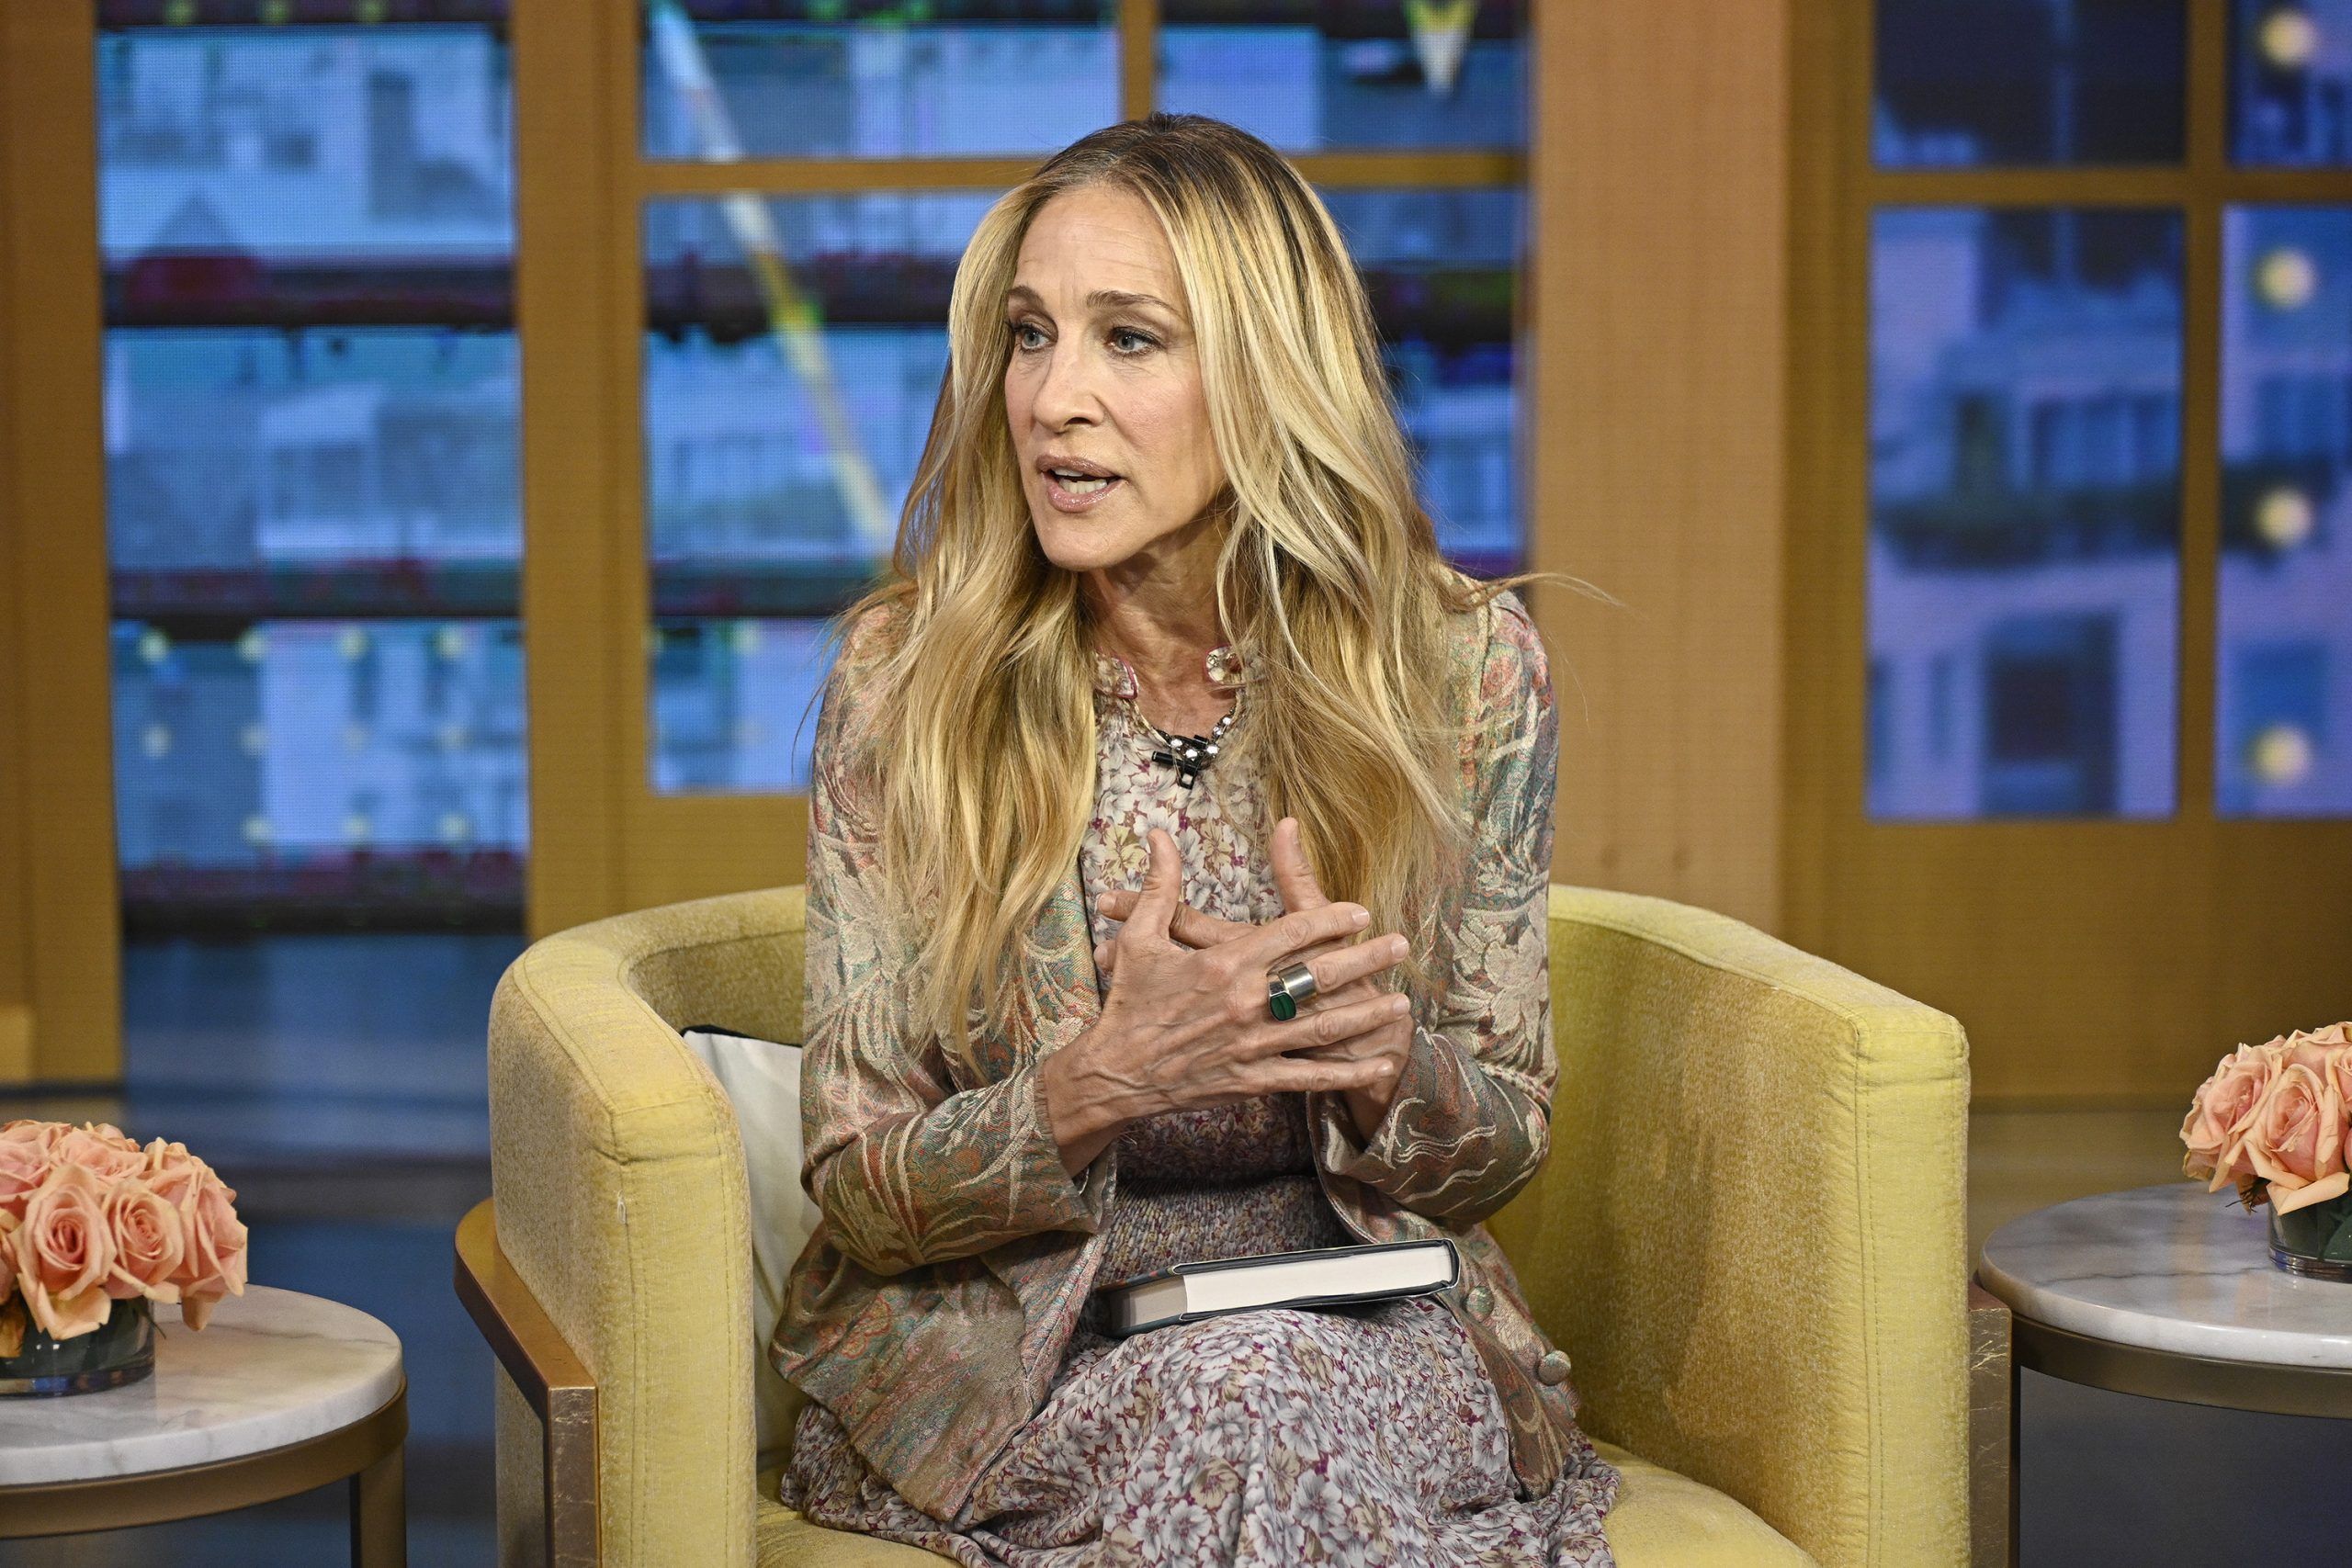 In Case You Missed It: Sarah Jessica Parker On ‘GMA’